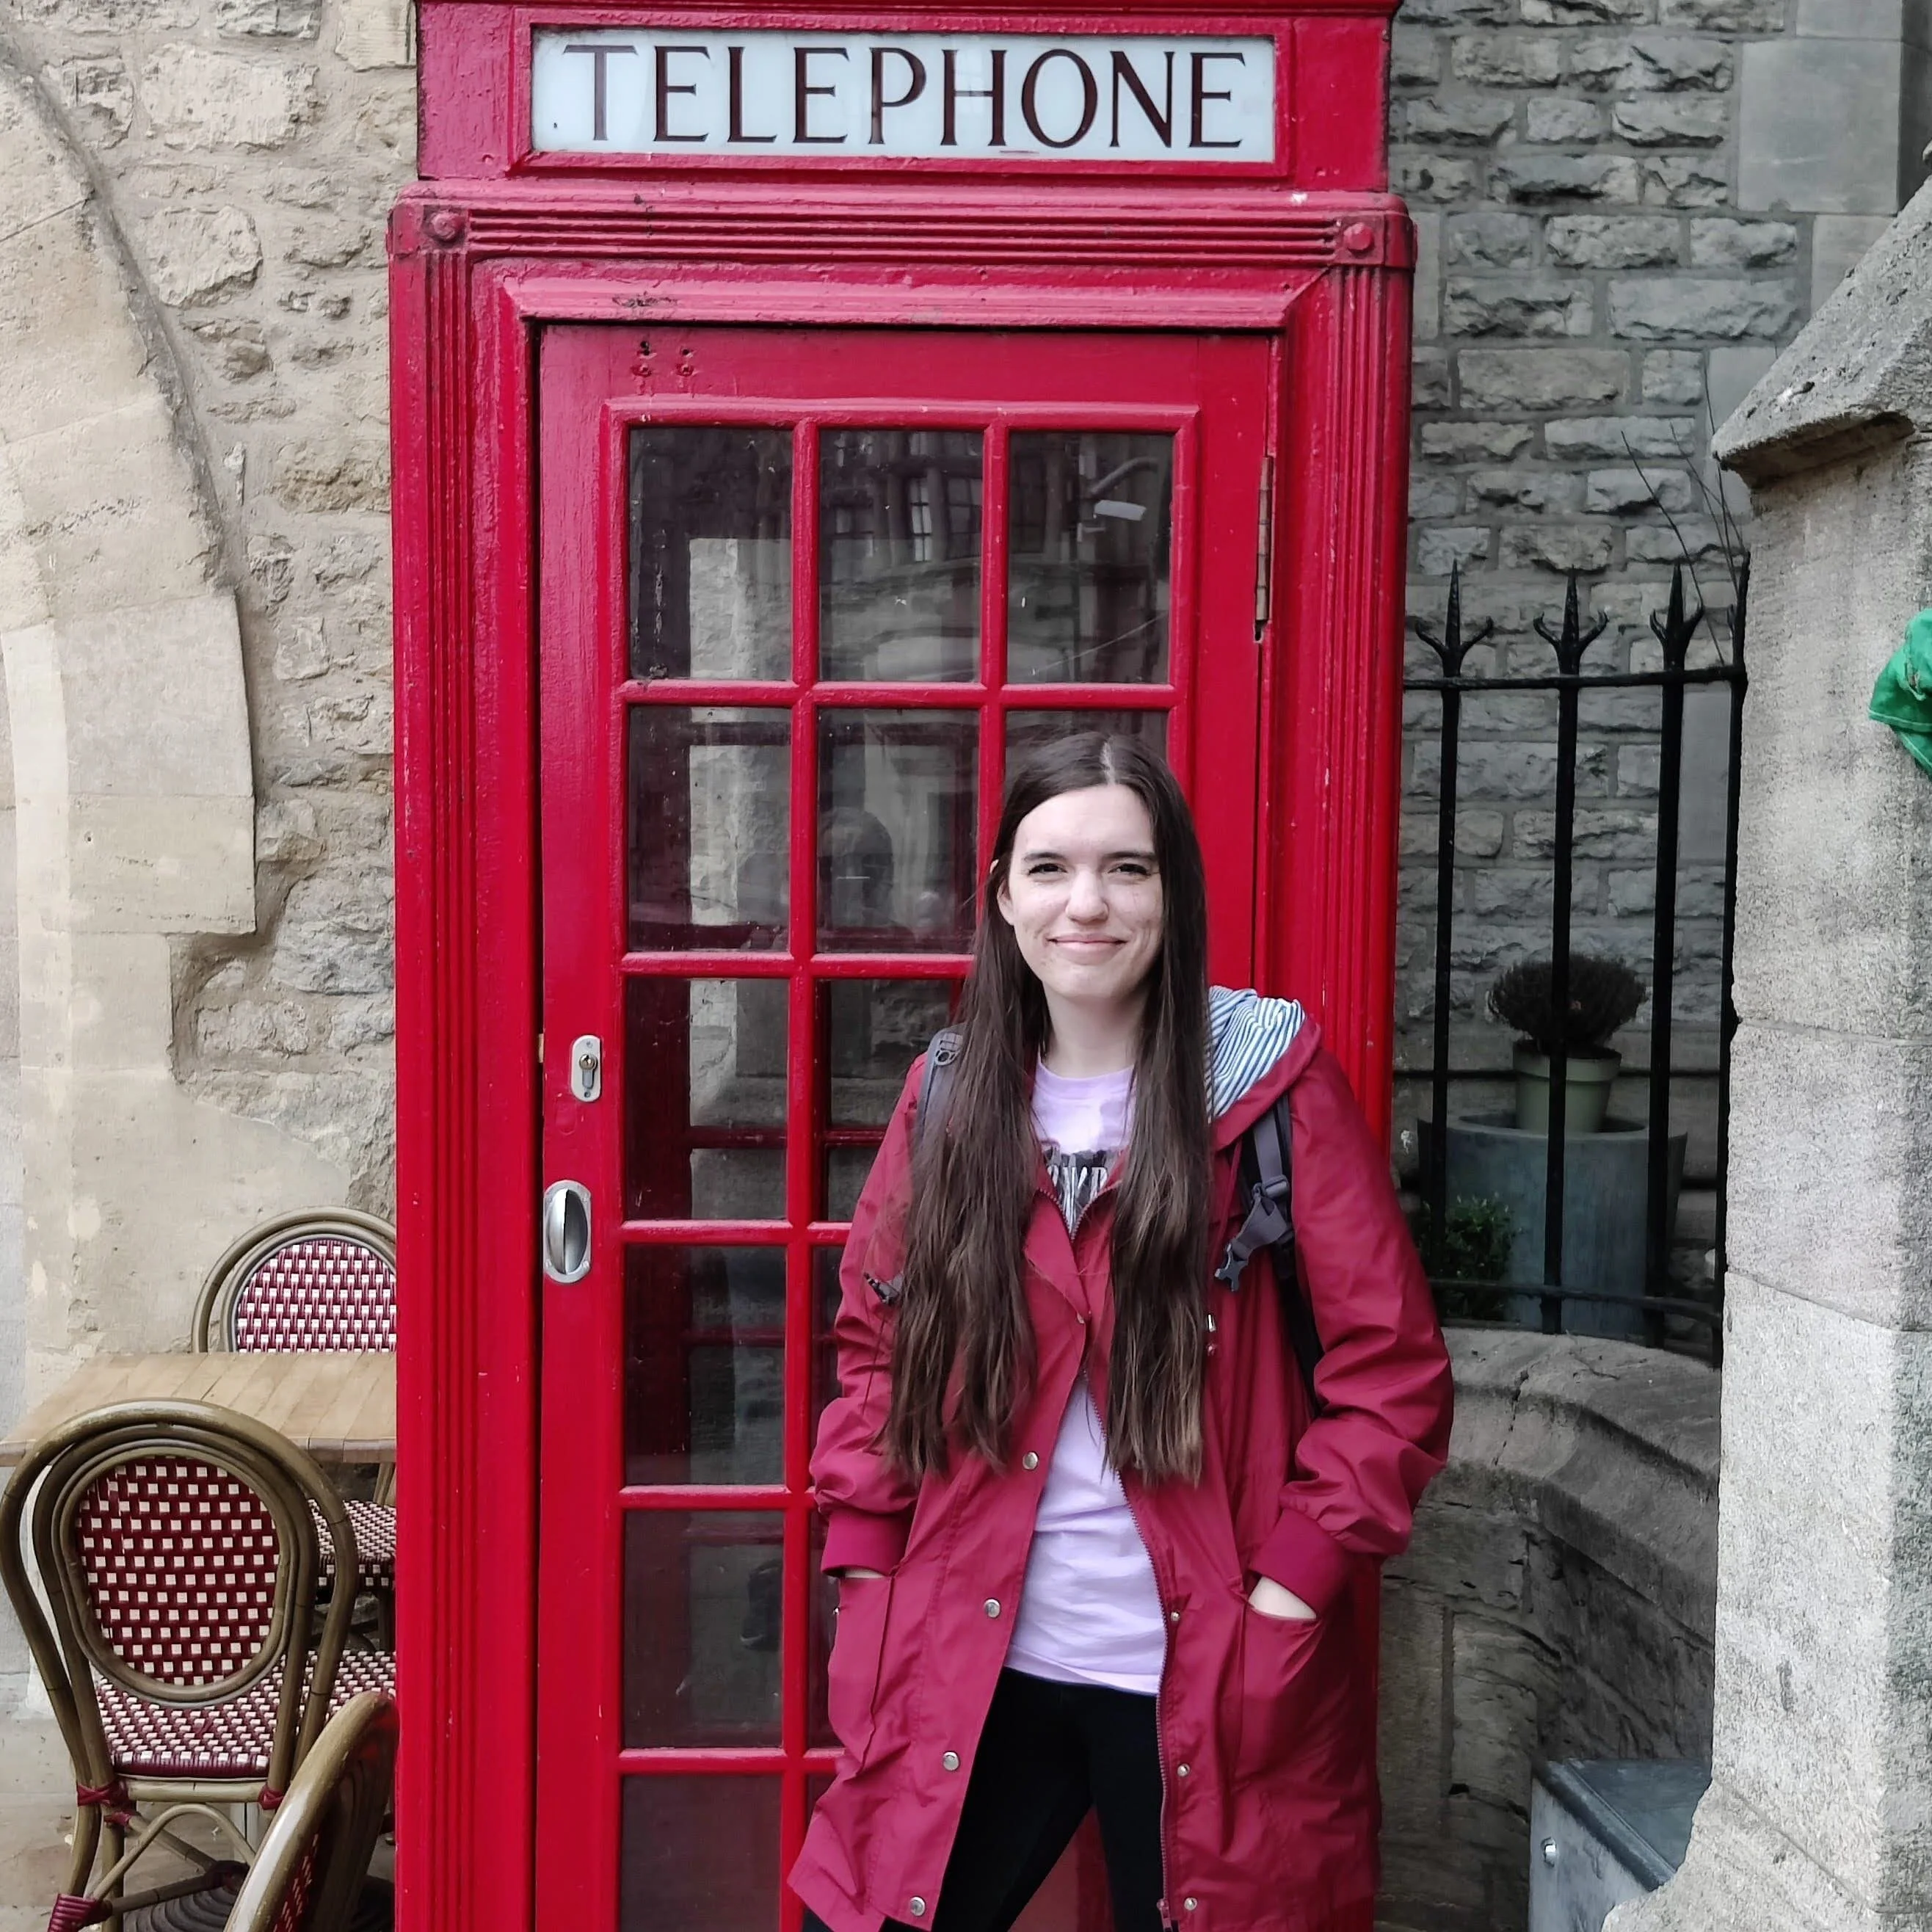 Erica pictured in front of a phone booth